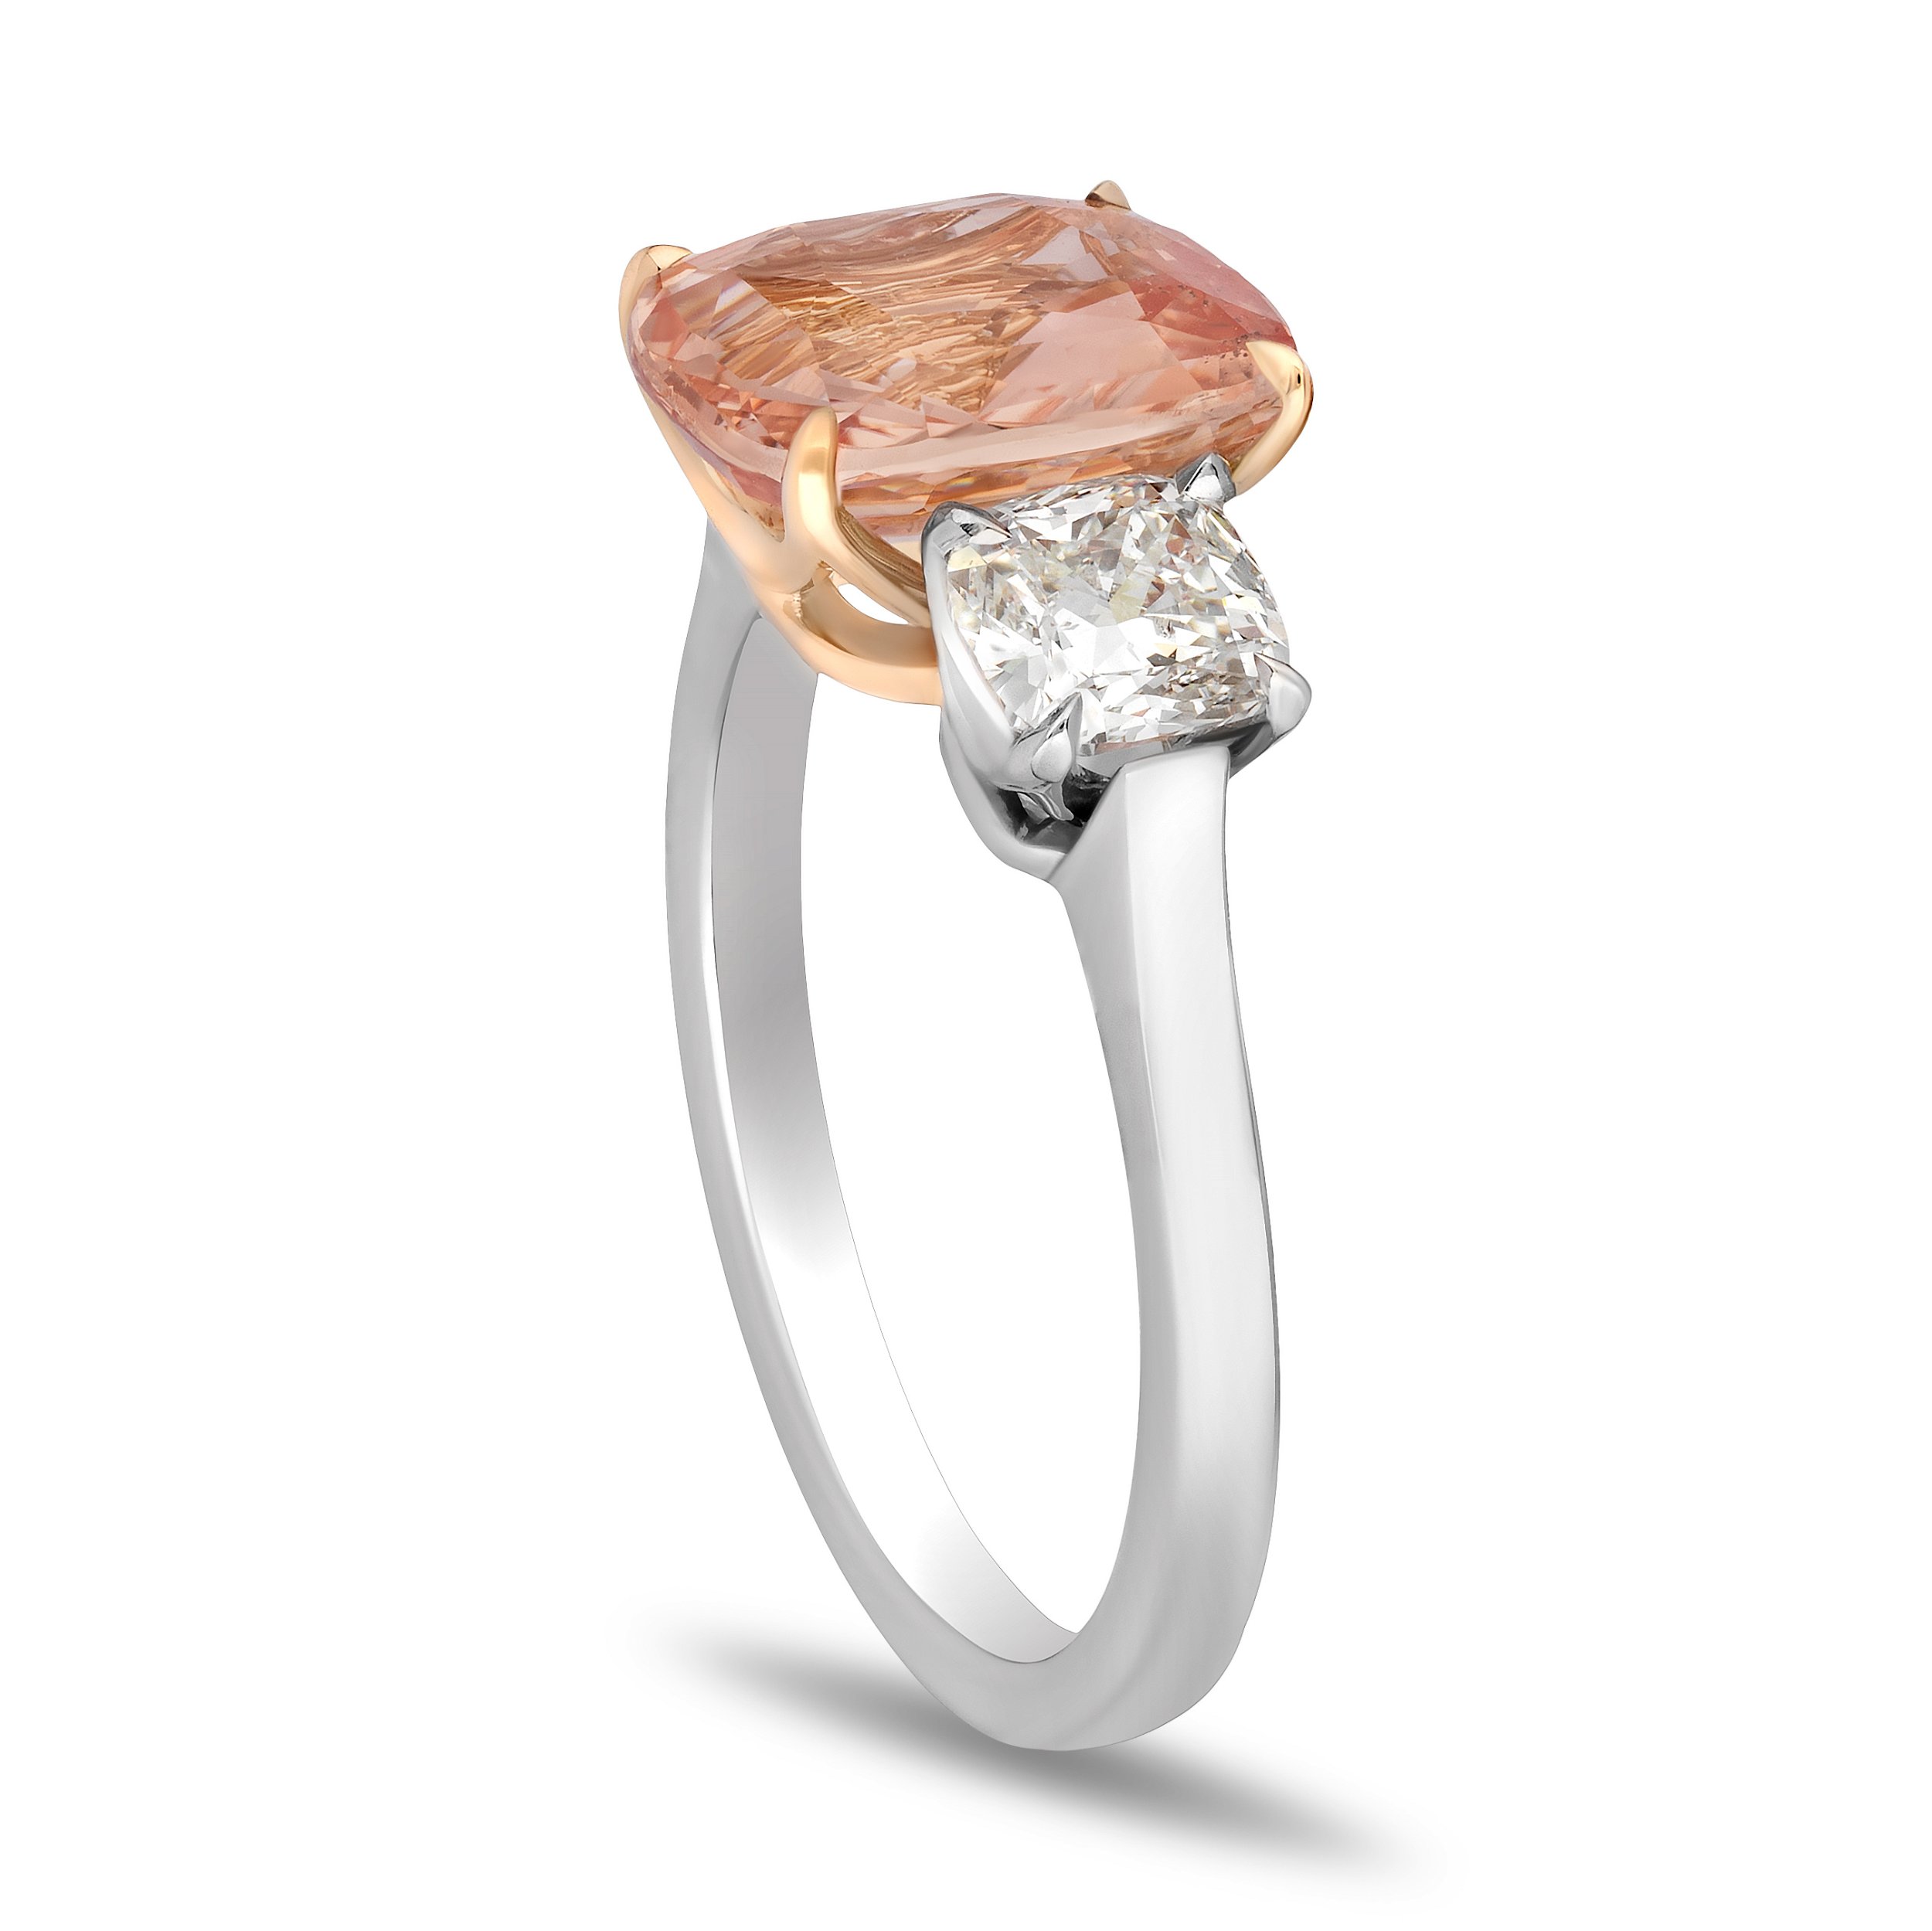 3.52ct Cushion Padparadscha Sapphire with Diamonds in Platinum and 18K Gold Setting